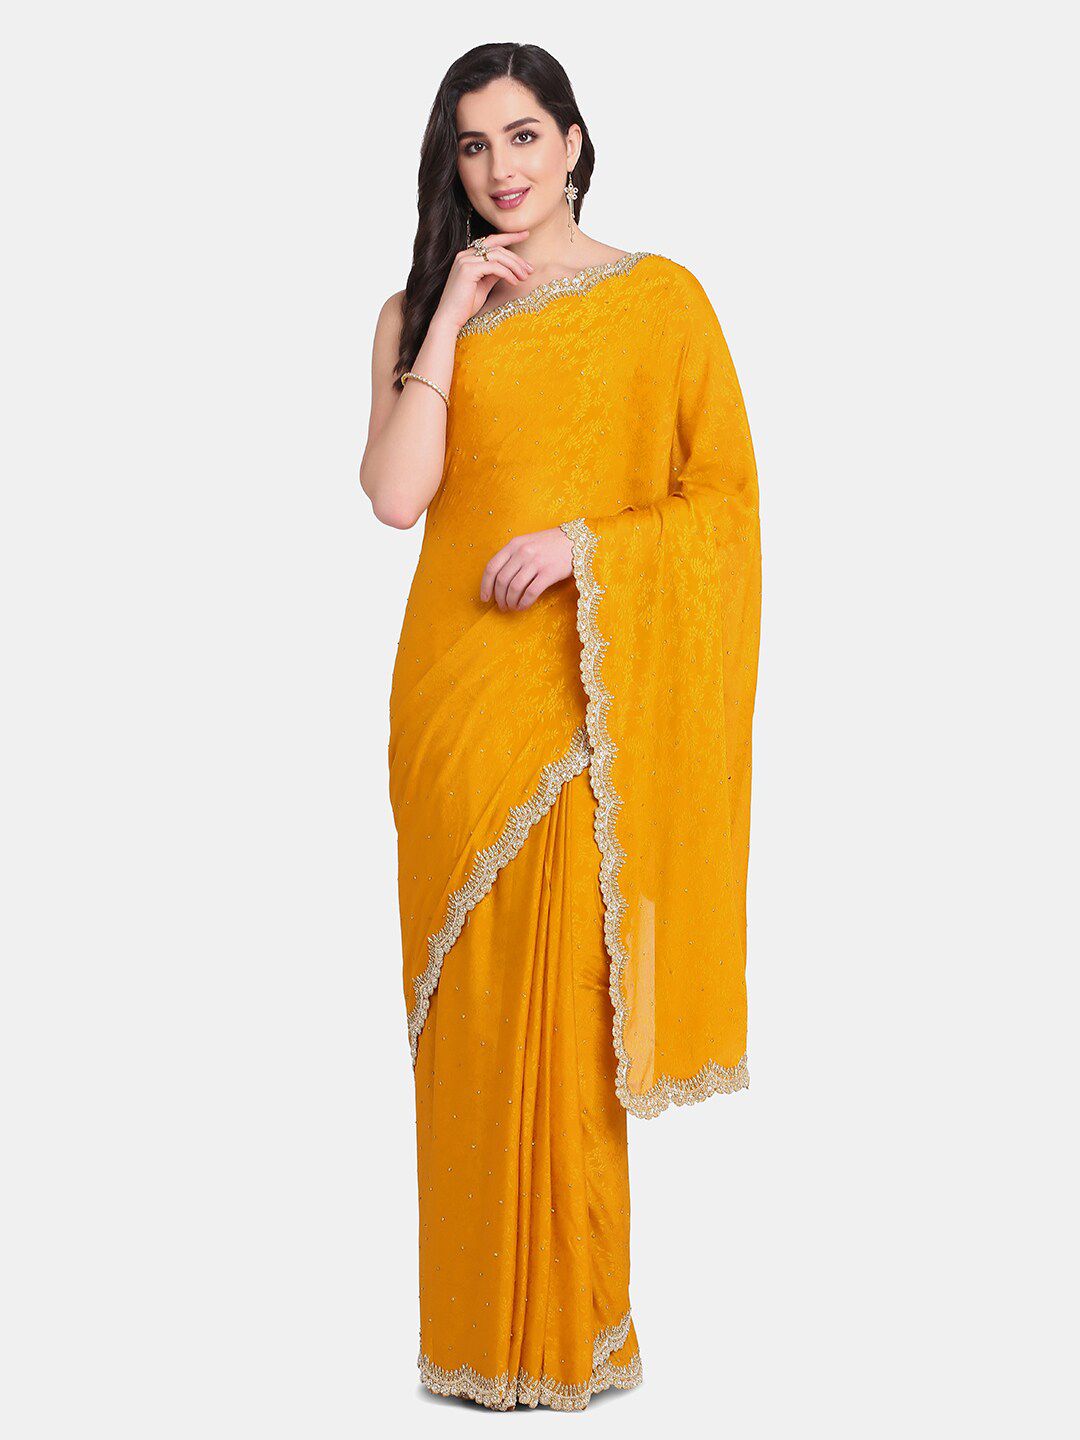 BOMBAY SELECTIONS Yellow & Gold-Toned Embellished Pure Crepe Saree Price in India